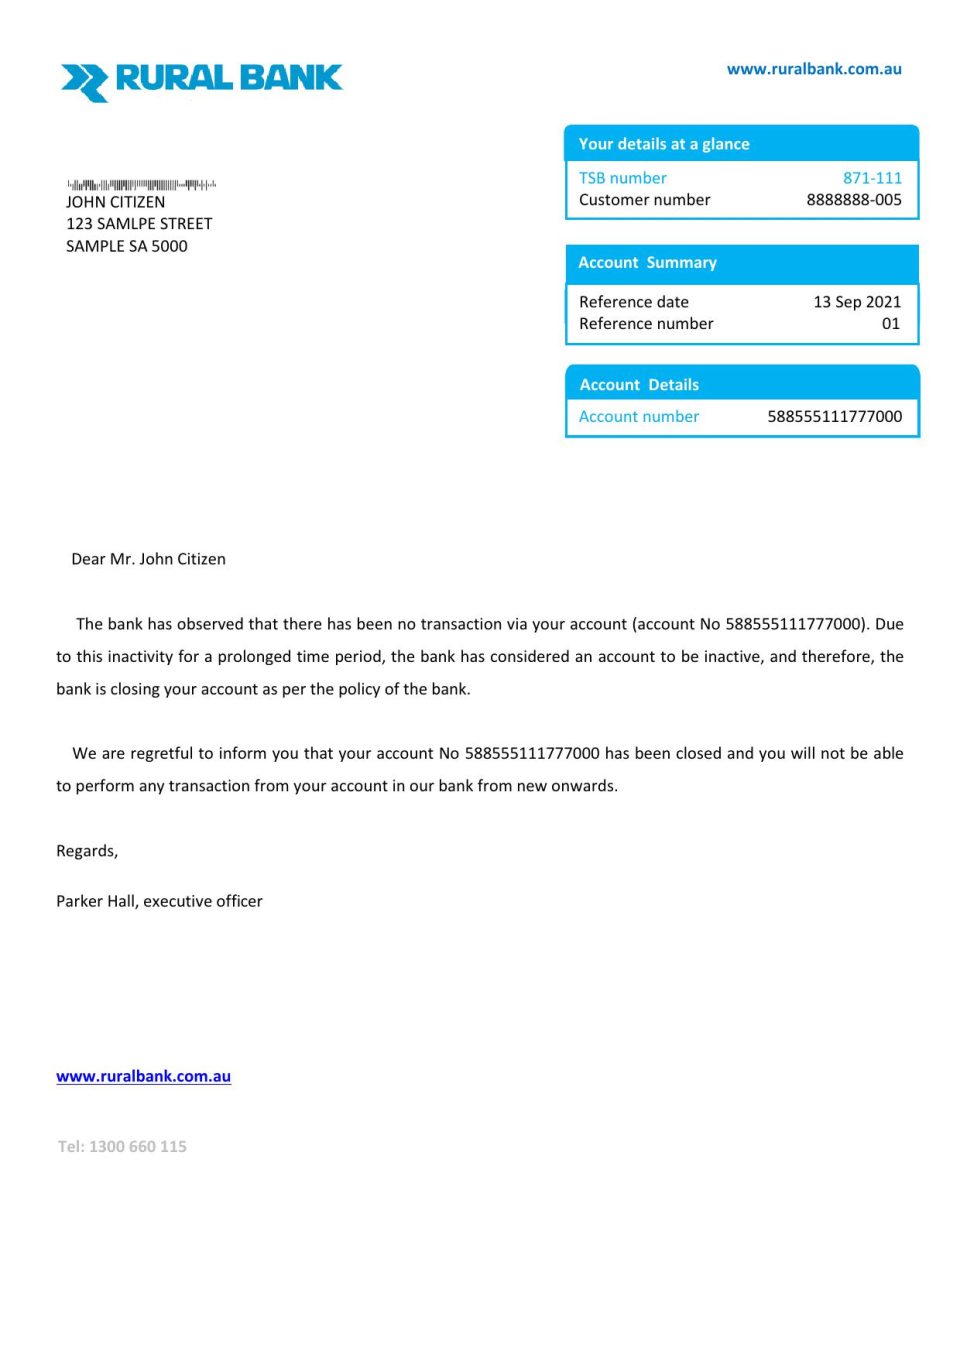 Download Australia Rural Bank Reference Letter Templates | Editable Word